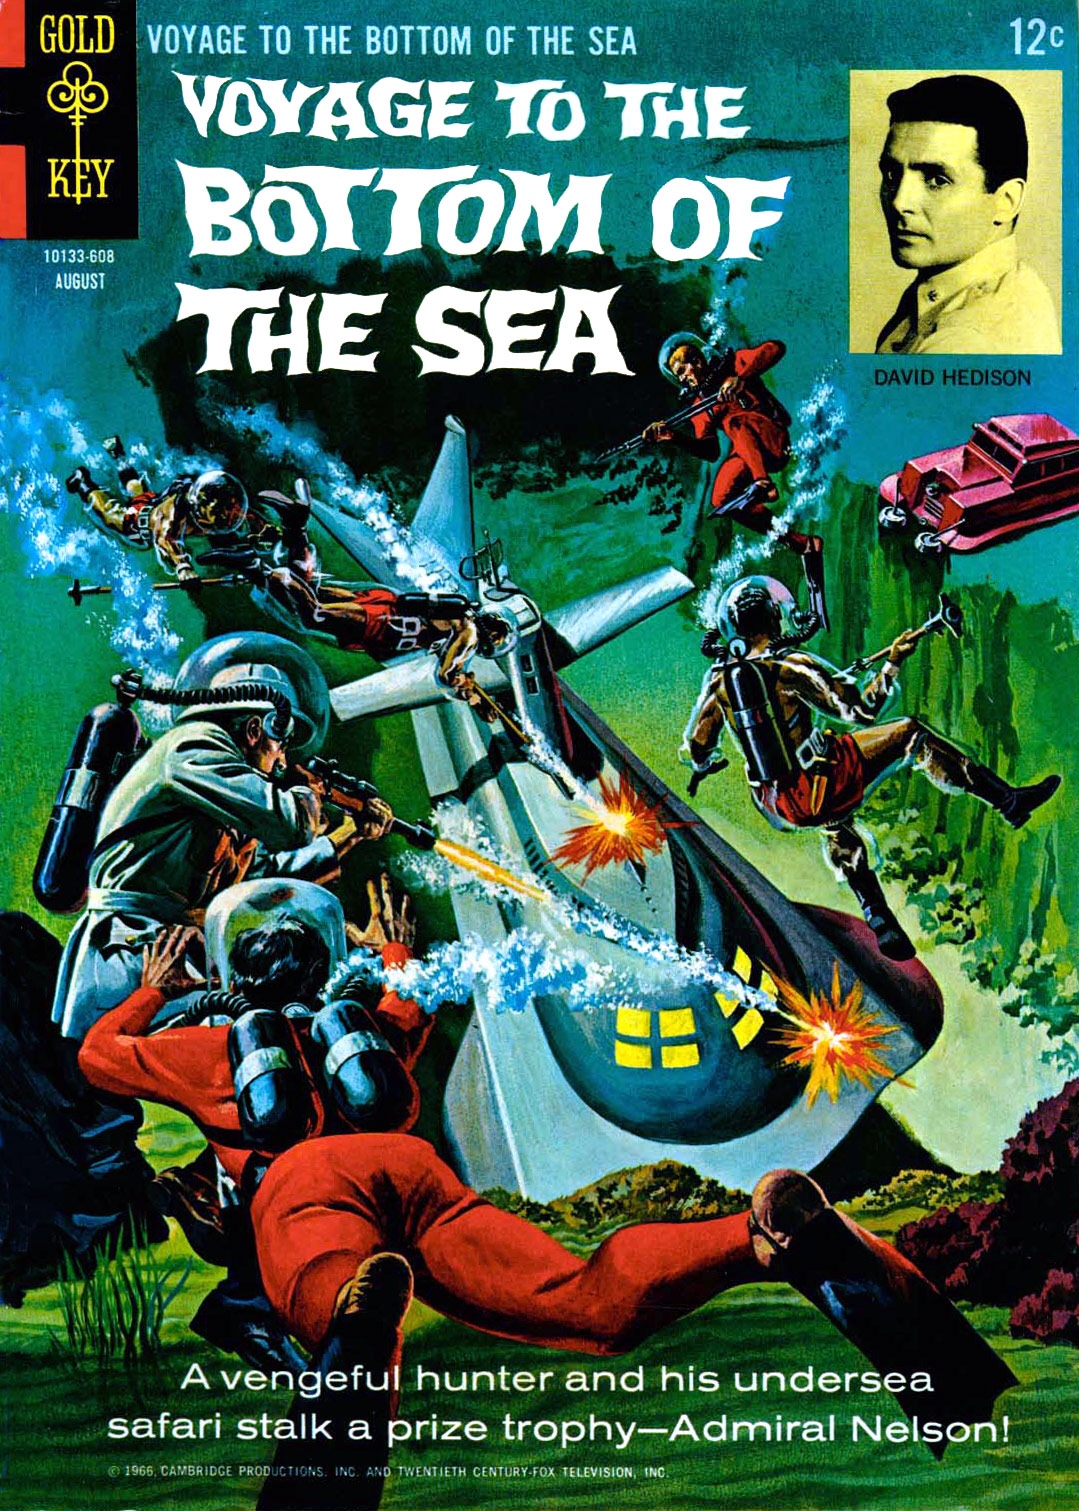 Gold Key’s Voyage to the Bottom of the Sea #5 - Cover by George Wilson